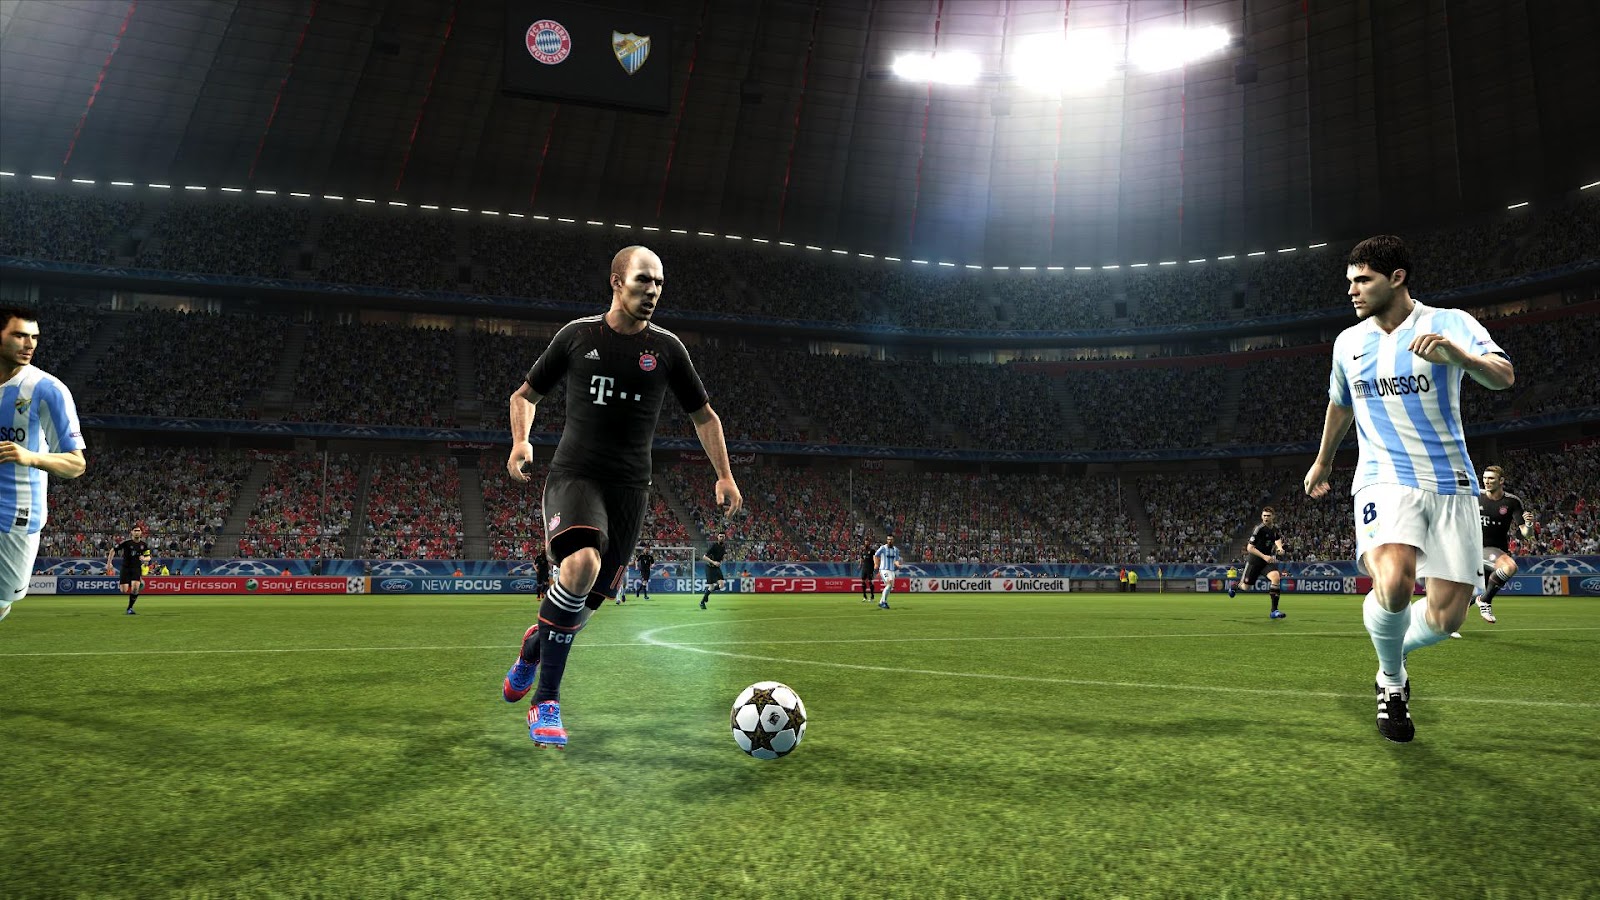 Ps3 patches. Pro Evolution Soccer 2012. PES 2012 патчи PESEDIT. Pro Evolution Soccer 5. Пес 2010 патч 2012.